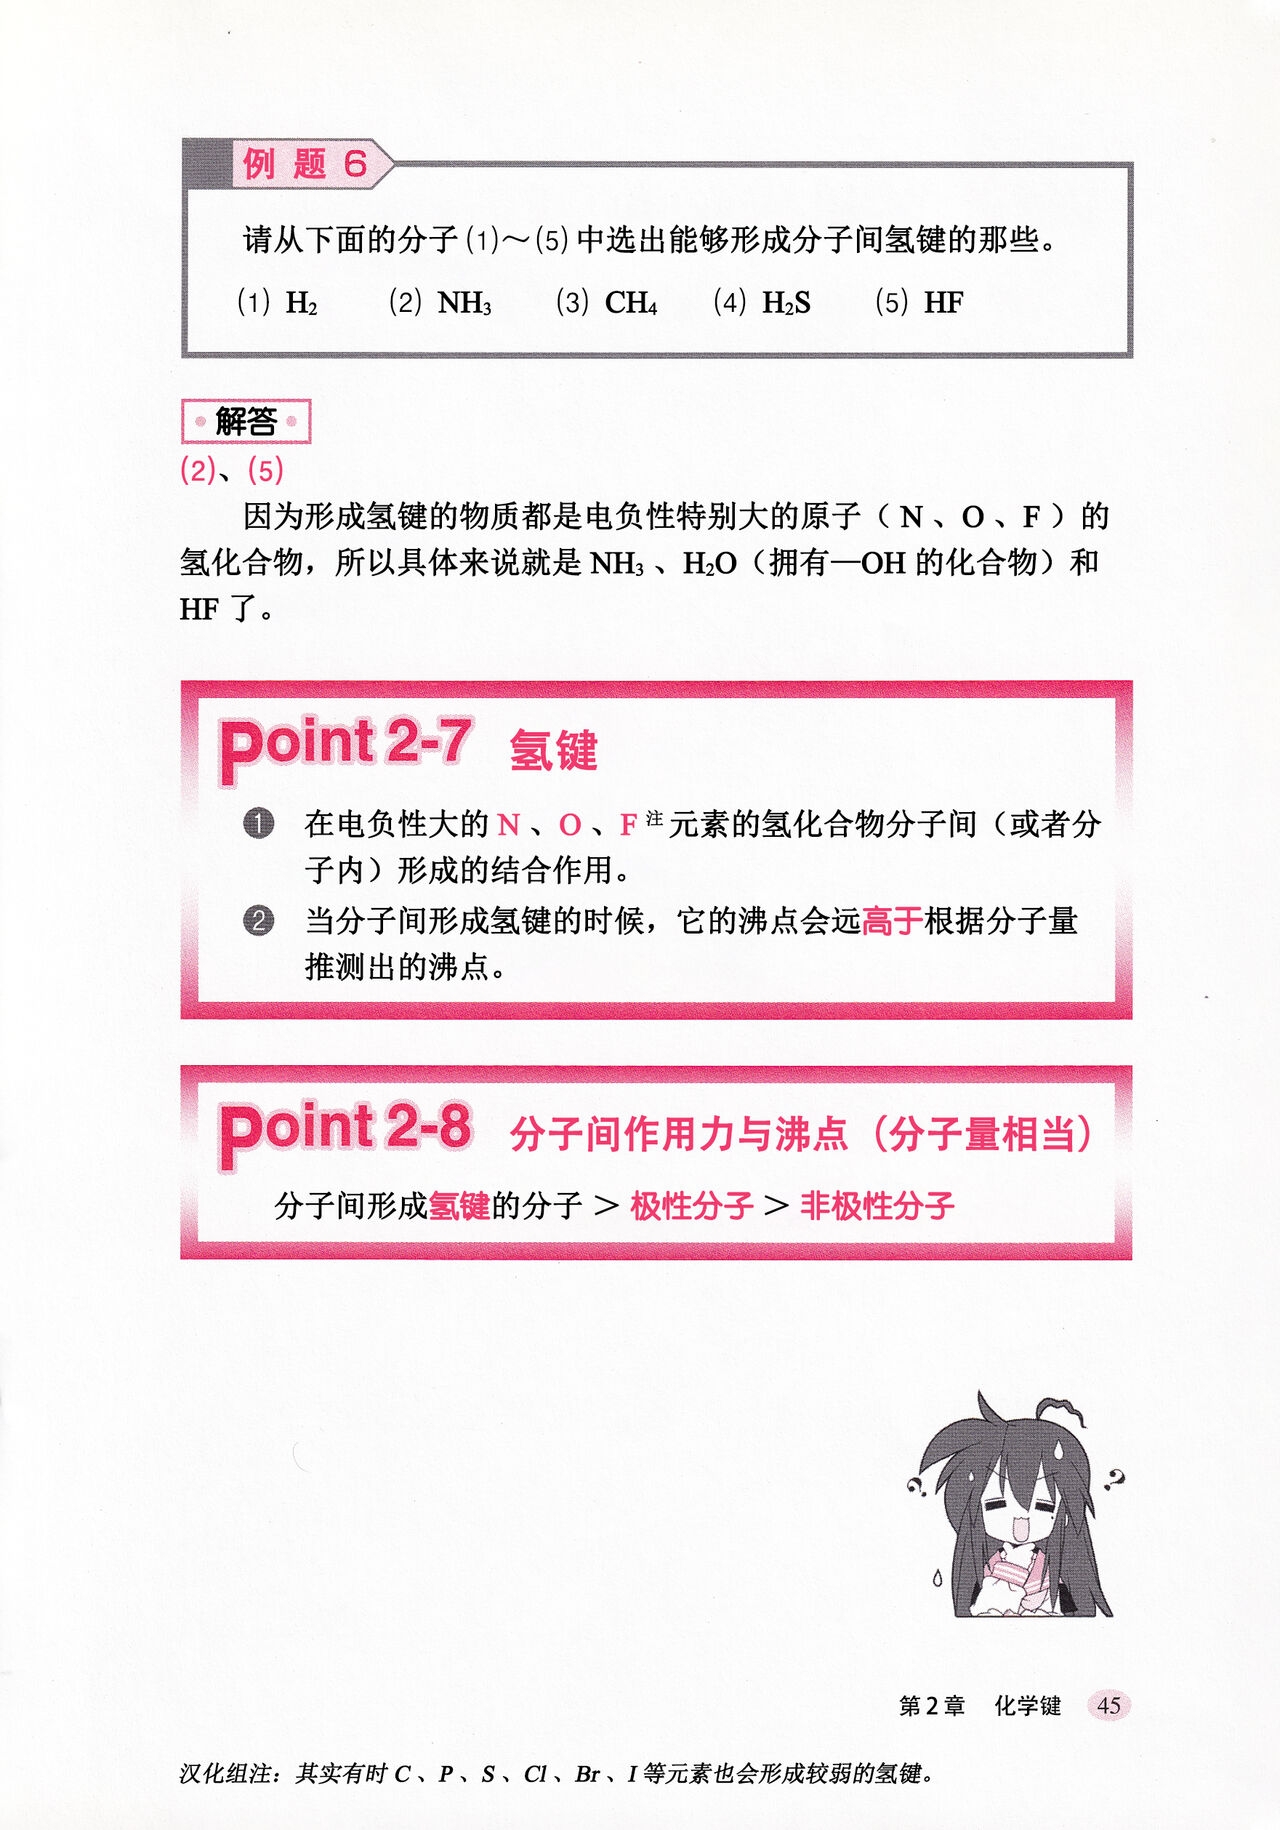 Let's Learn Chemistry with Lucky☆Star -Basic Theory- Section 1-5|和幸运星一起学化学 -理论篇- 第1-5章[Chinese][桃樹漢化組] 54